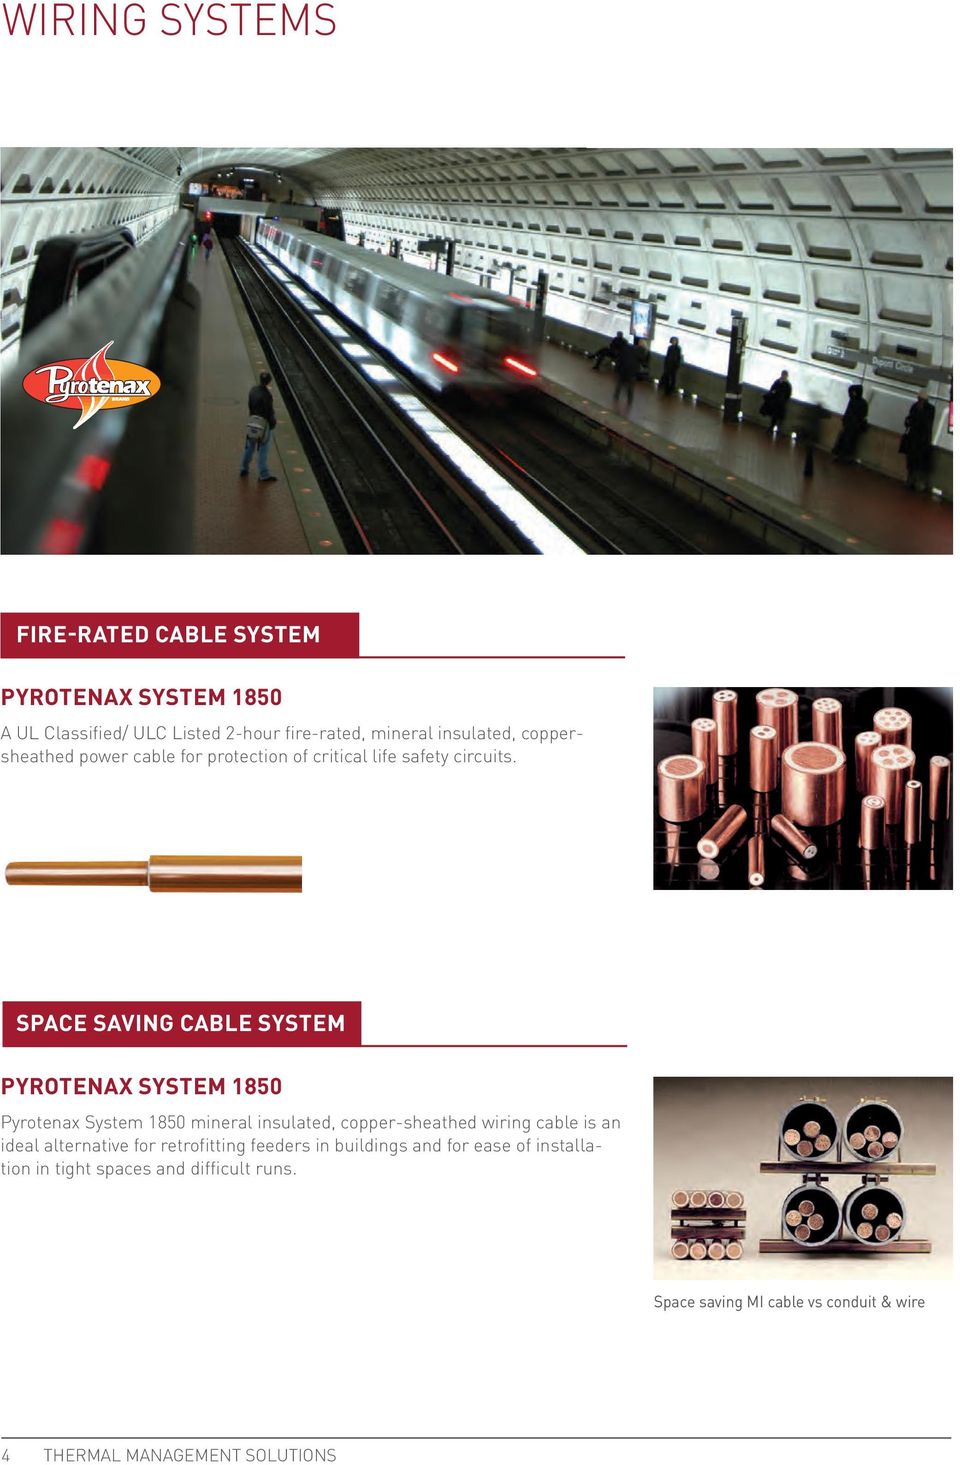 SPACE SAVING CABLE SYSTEM Pyrotenax System 1850 Pyrotenax System 1850 mineral insulated, copper-sheathed wiring cable is an ideal